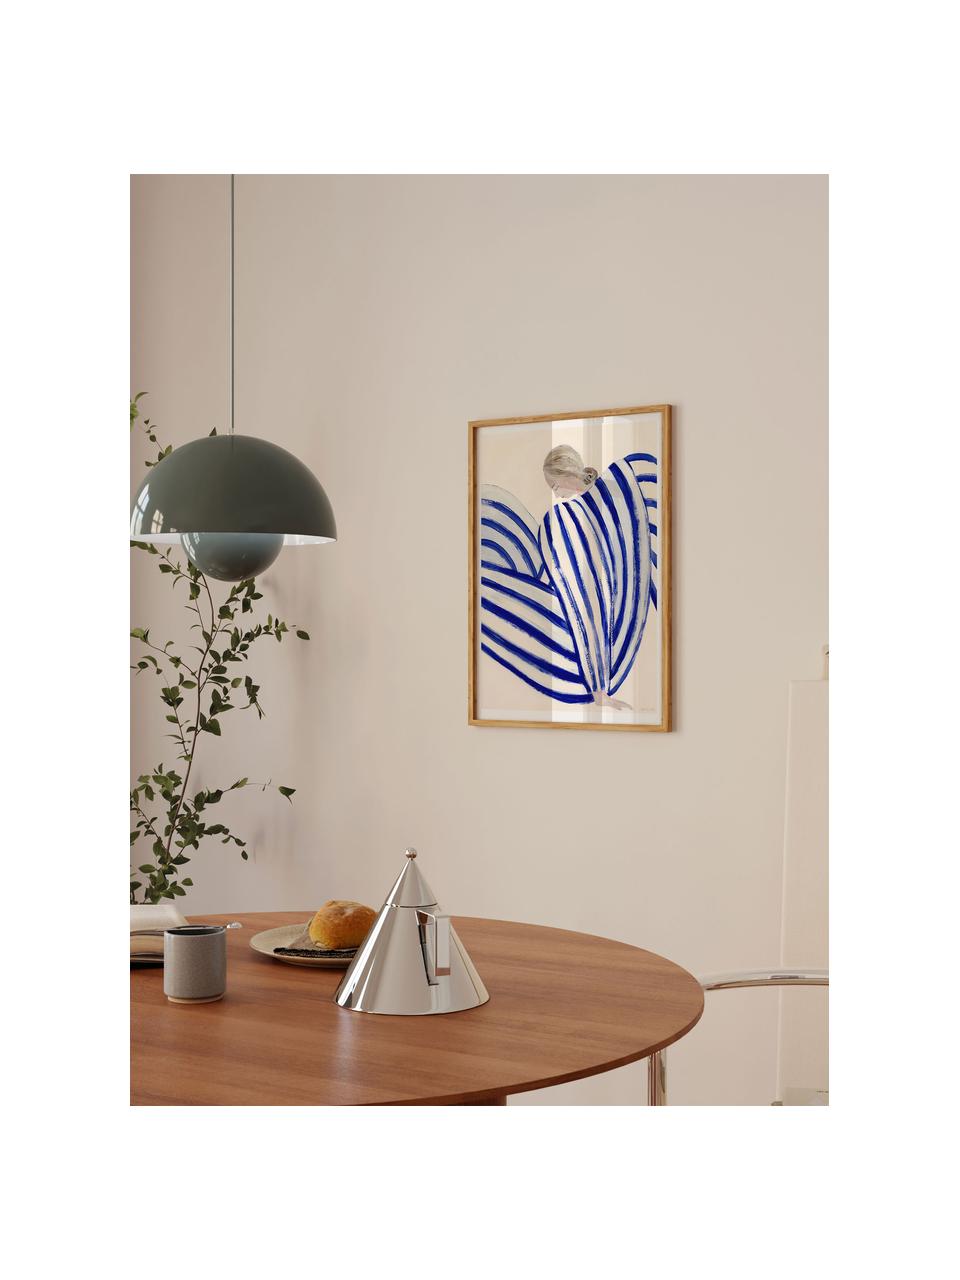 Poster blauw Stripe At Concorde by Sofia Lind x The Poster Club, Donkerblauw, lichtbeige, B 30 x H 40 cm